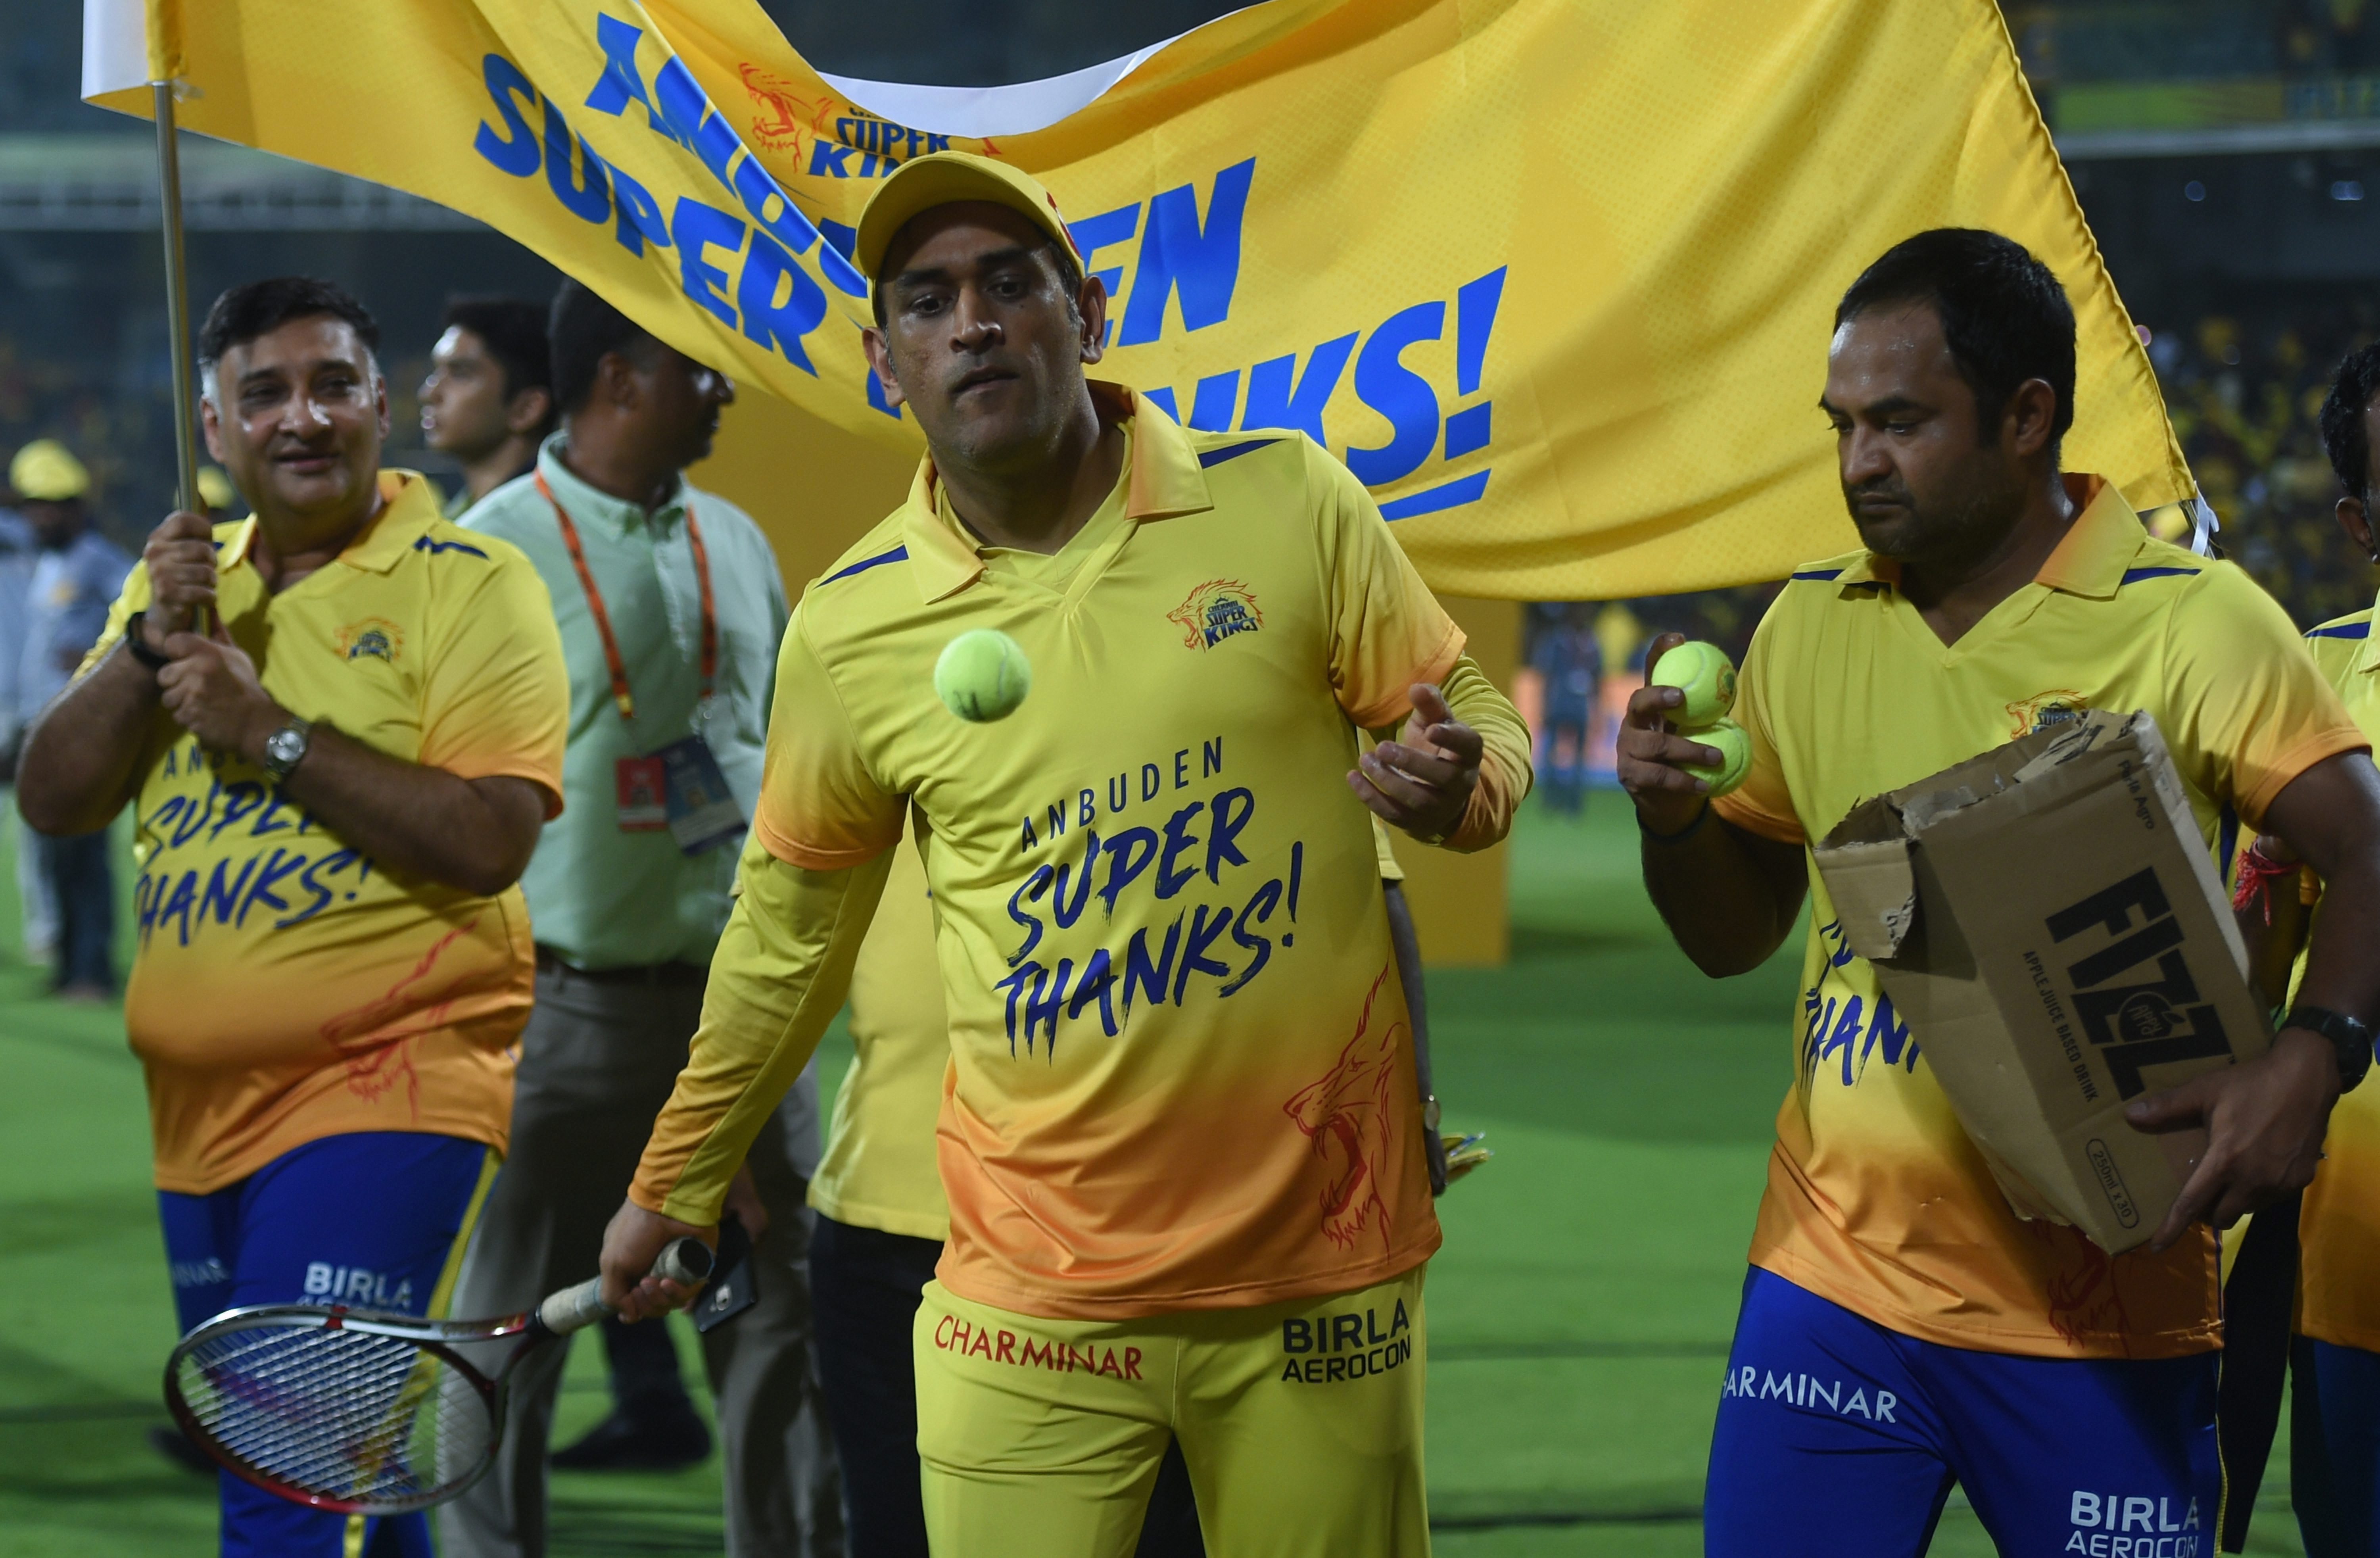 Tennis ball cricket helps me for quick hands behind stumps : Dhoni